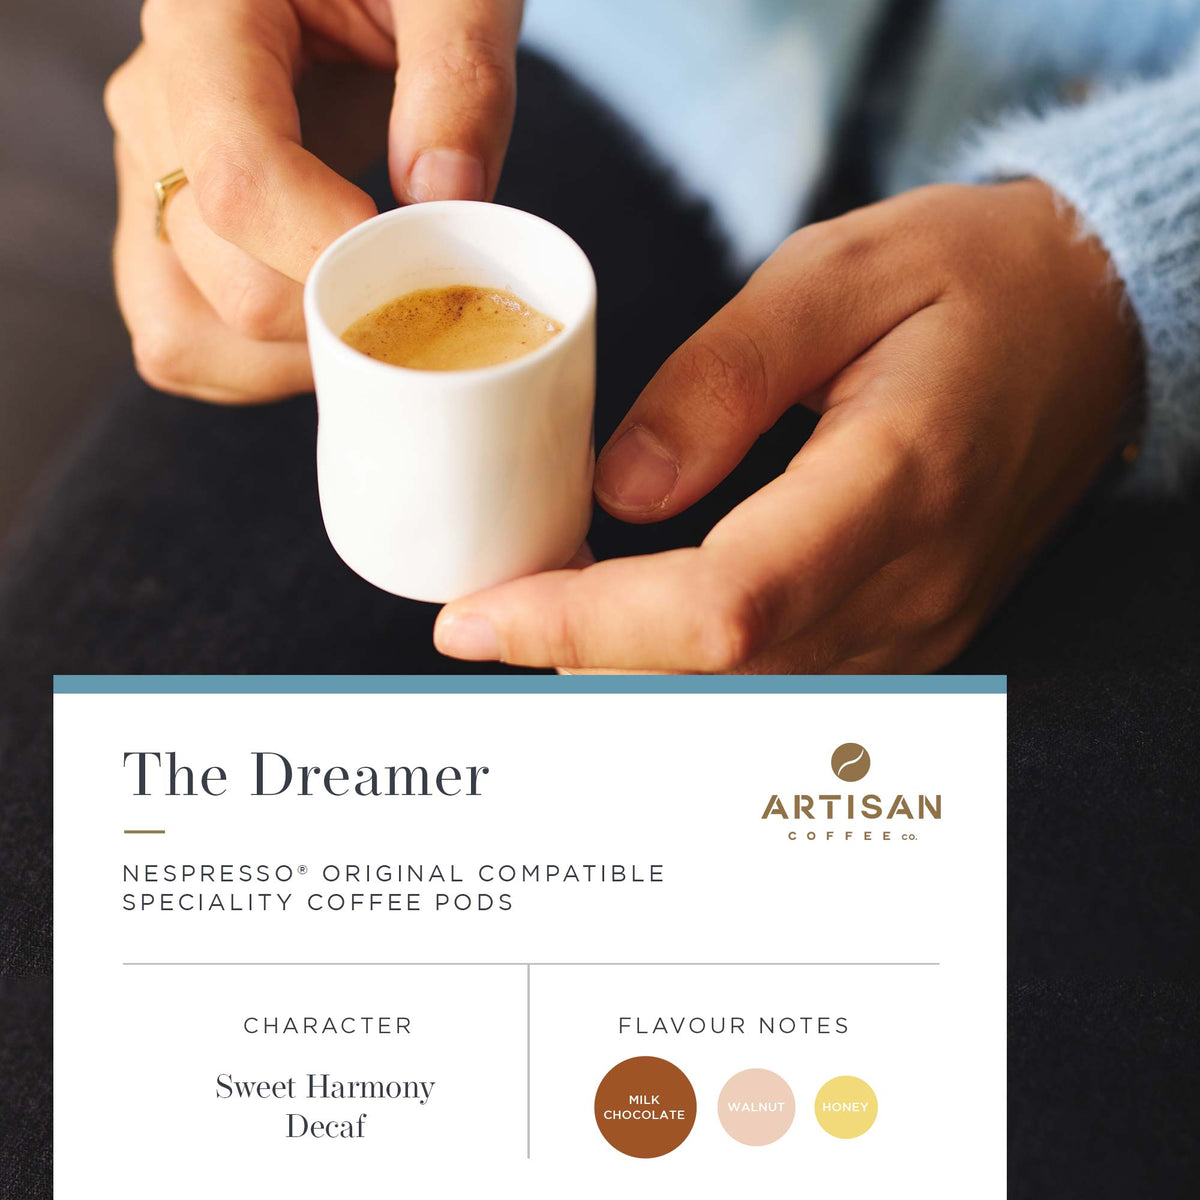 Artisan Coffee Co The Dreamer Pods Infographic Flavour Notes